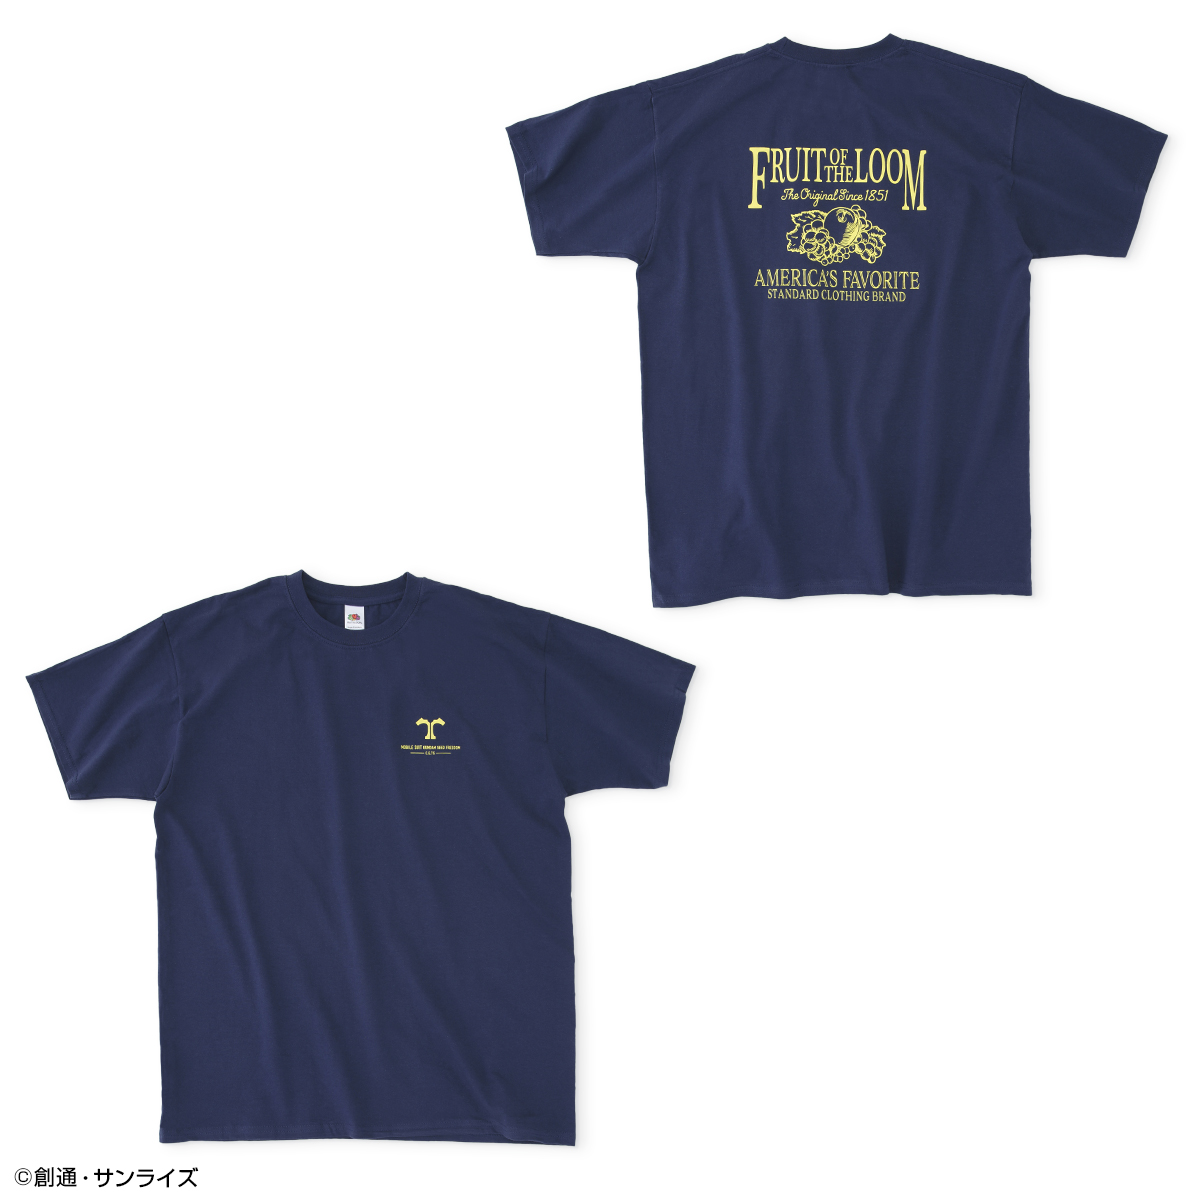 STRICT-G FRUIT OF THE LOOM『機動戦士ガンダムSEED FREEDOM』Tシャツ ターミナル